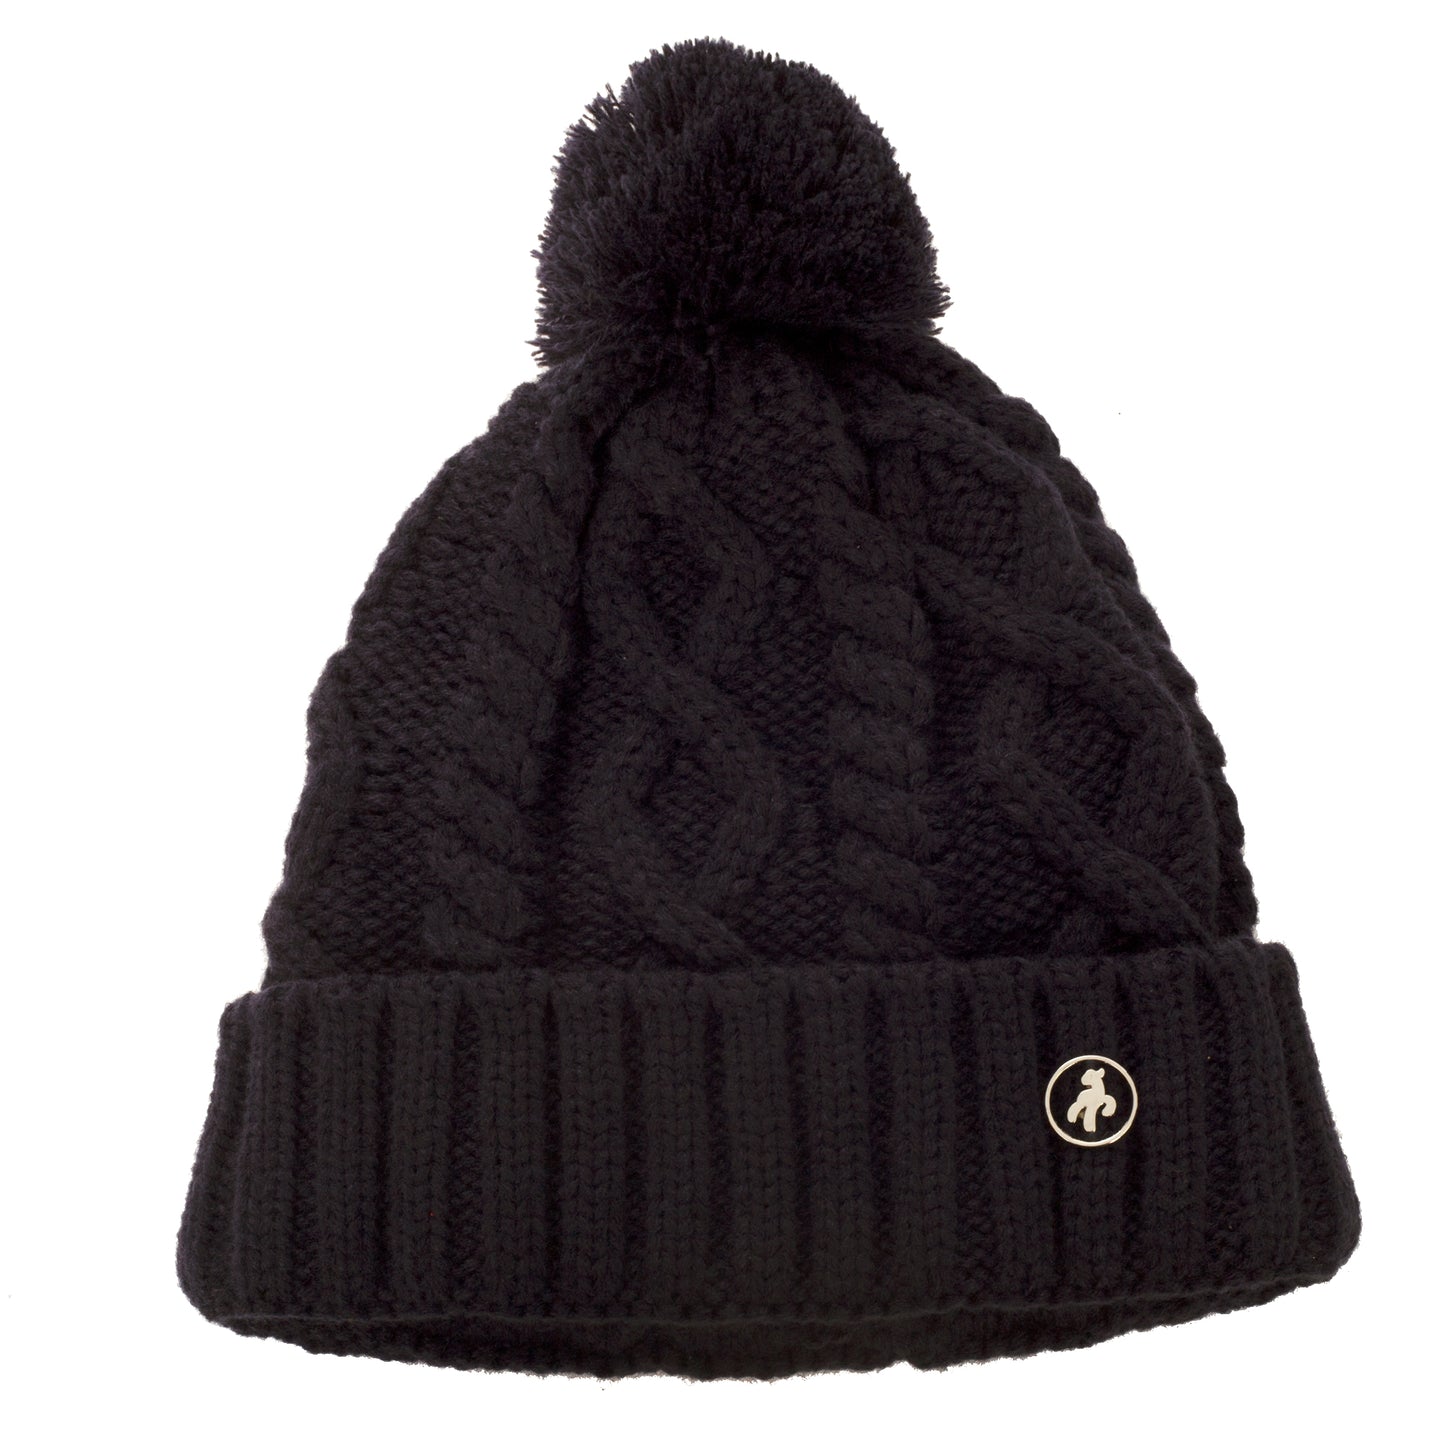 Green Lamb Ladies Krista Fleece Lined Cable Hat with Pom Pom in Black